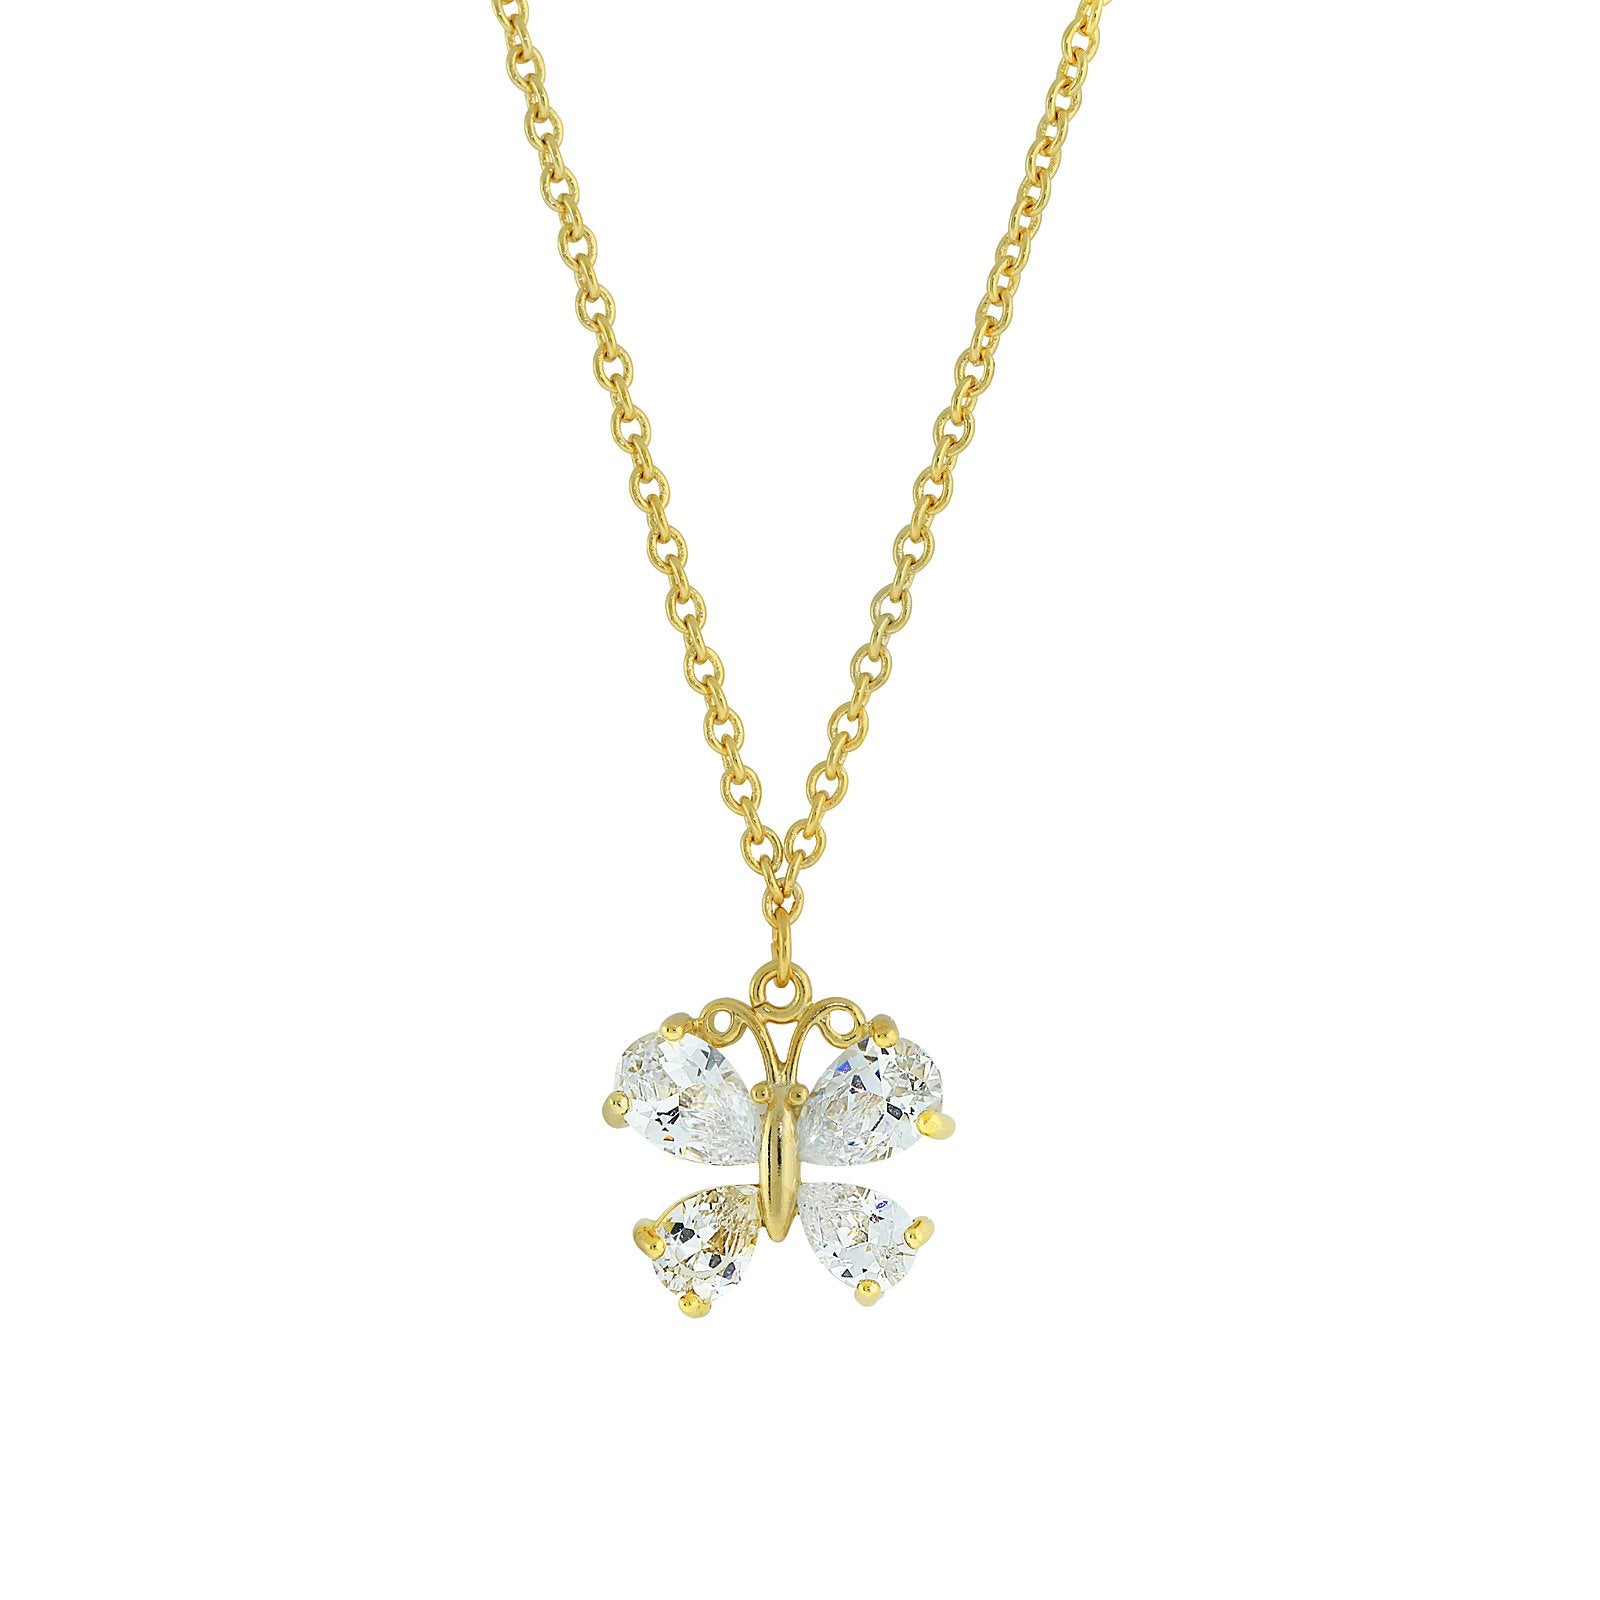 14K Gold-Dipped Cubic Zirconia Butterfly Pendant Necklace 16Adj.